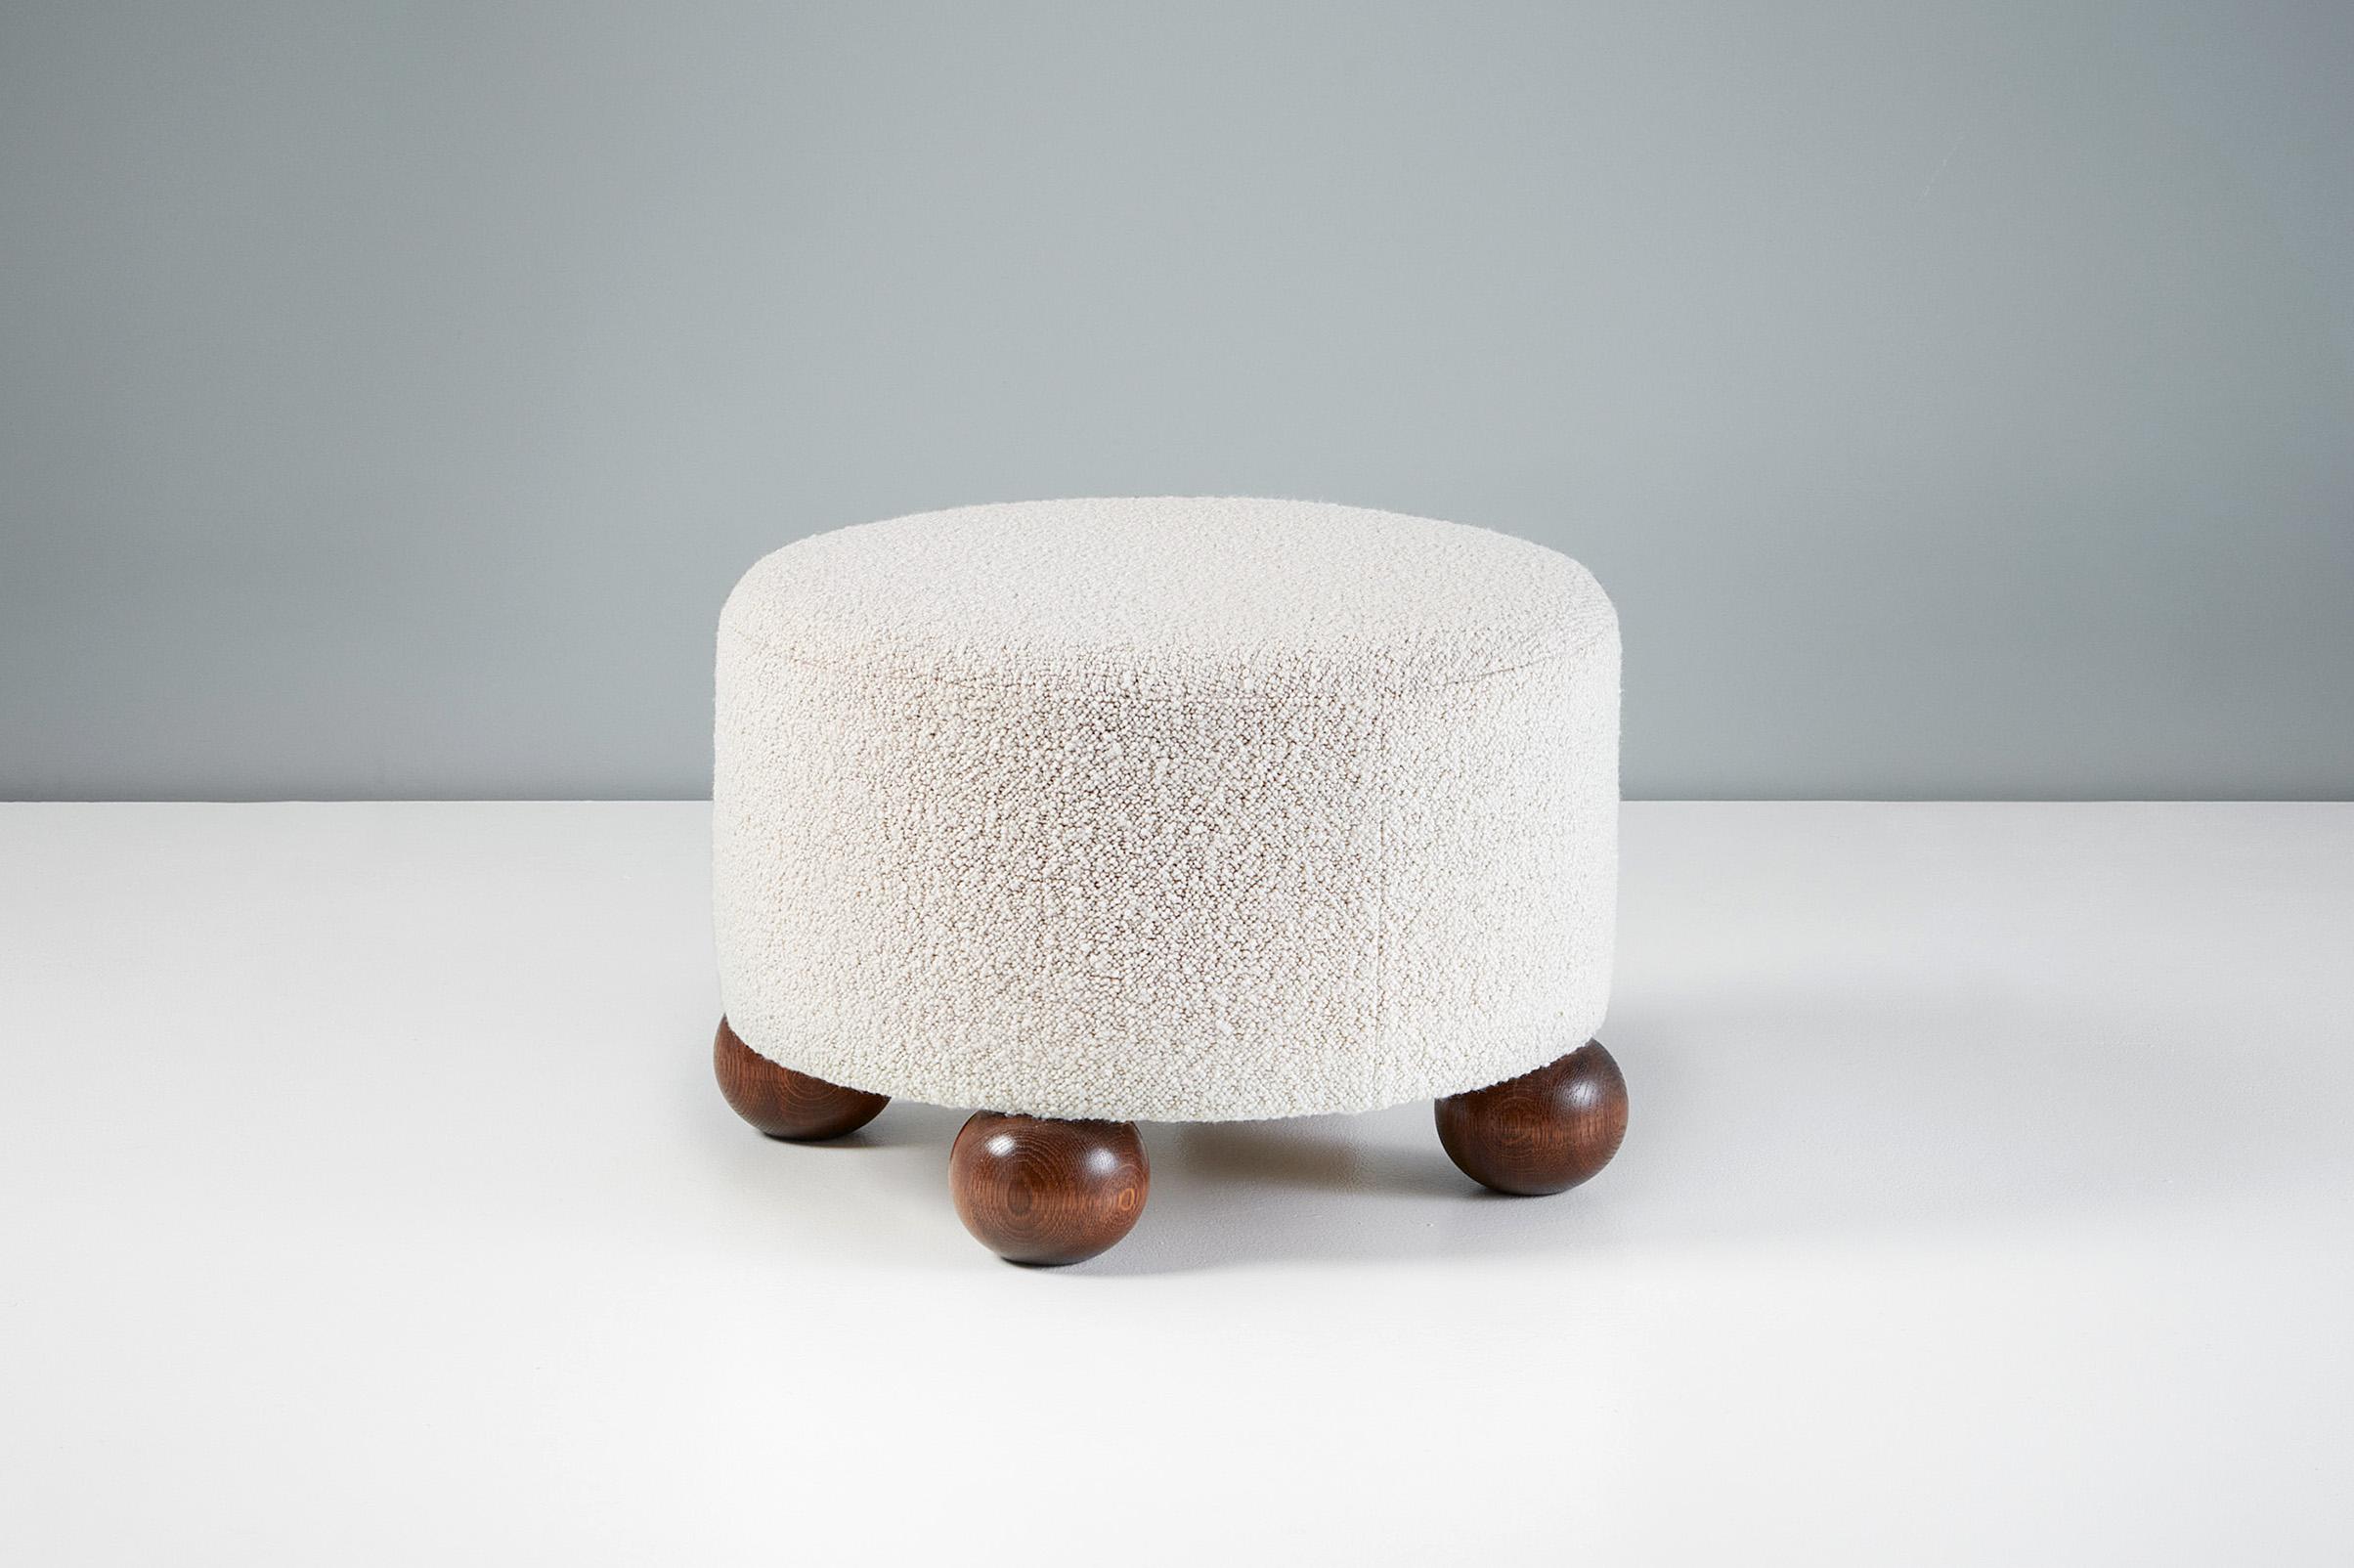 Dagmar - Luupo Round Ottoman

Custom-made ottoman developed & produced at our workshops in London using the highest quality materials. This example is upholstered in Karakroum 'Ecume' boucle fabric with fumed oak ball feet. This ottoman is available